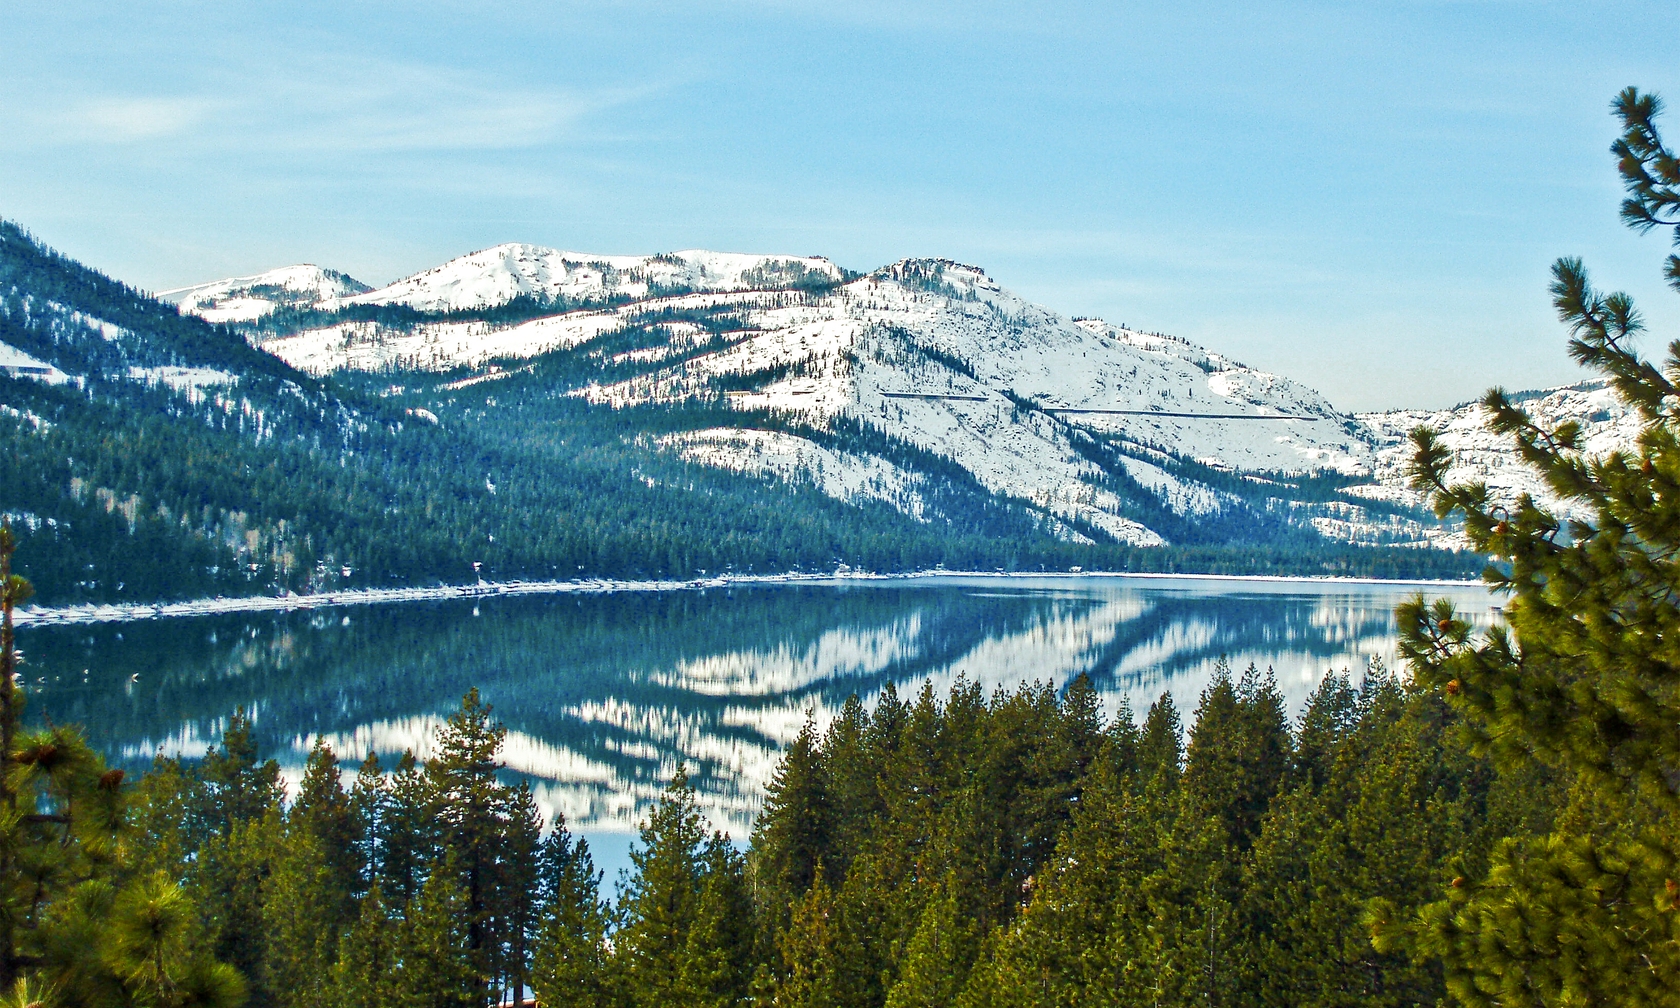 Vacation rentals in Donner Lake